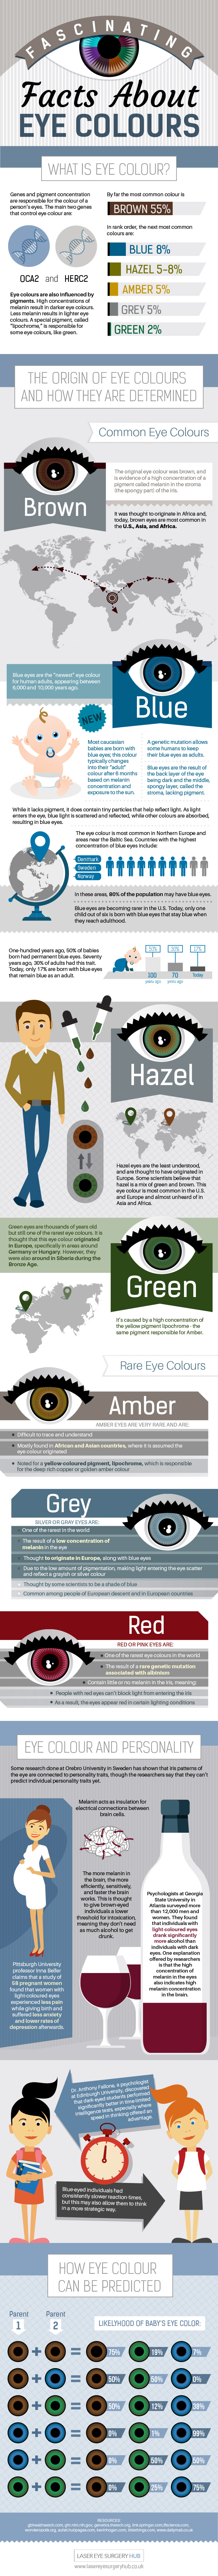 Predicting Baby's Eye Color and More Amazing Facts